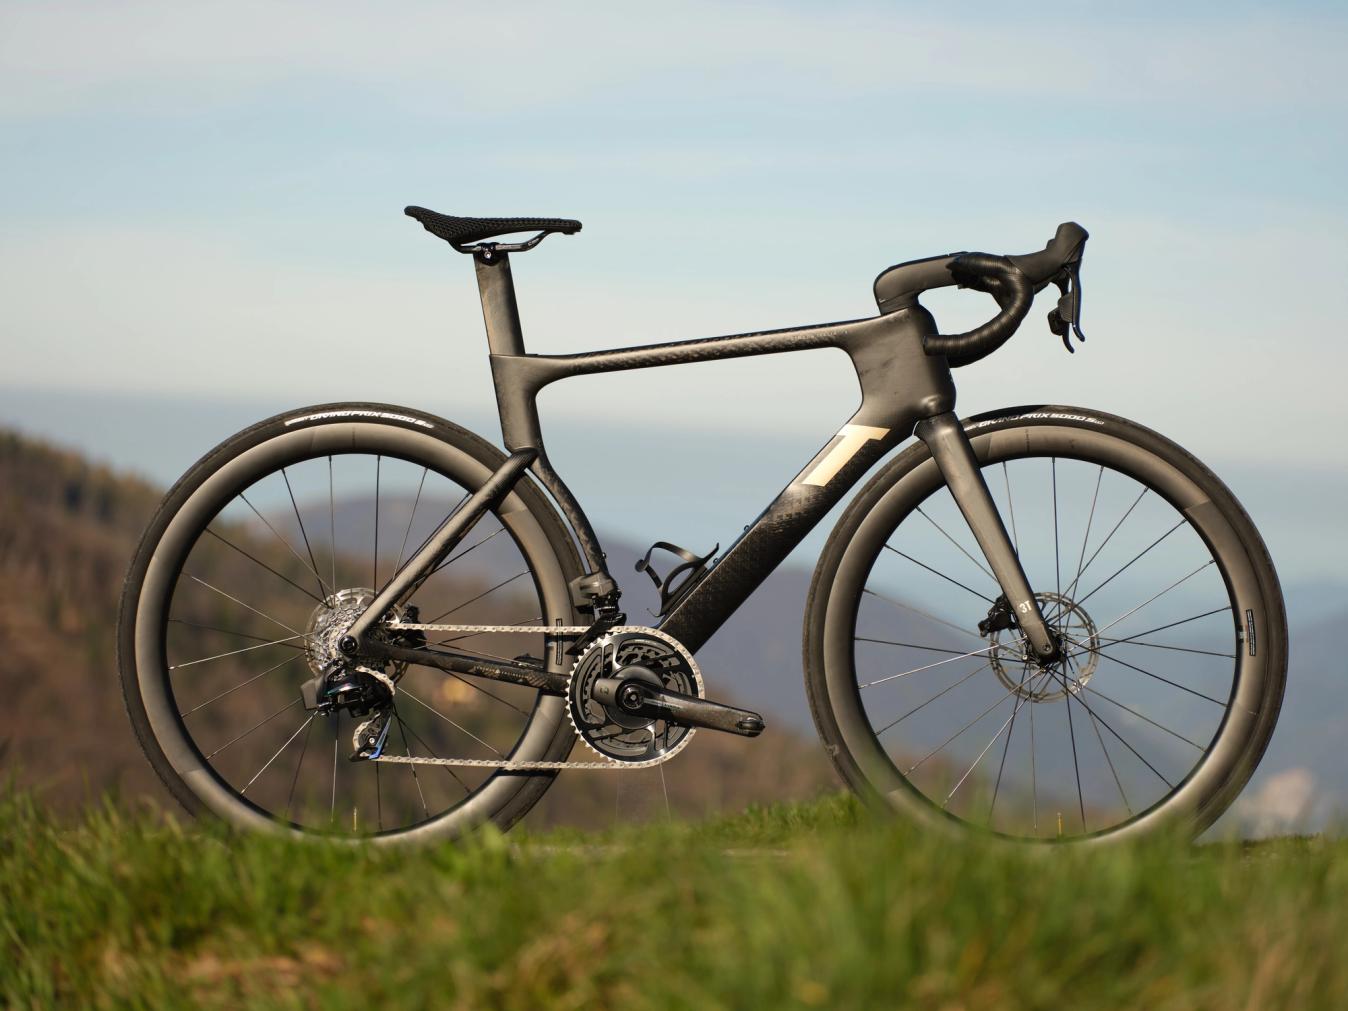 The Strade Italia will also be available in a Project X 'naked finish' to show off the bikes carbon weave